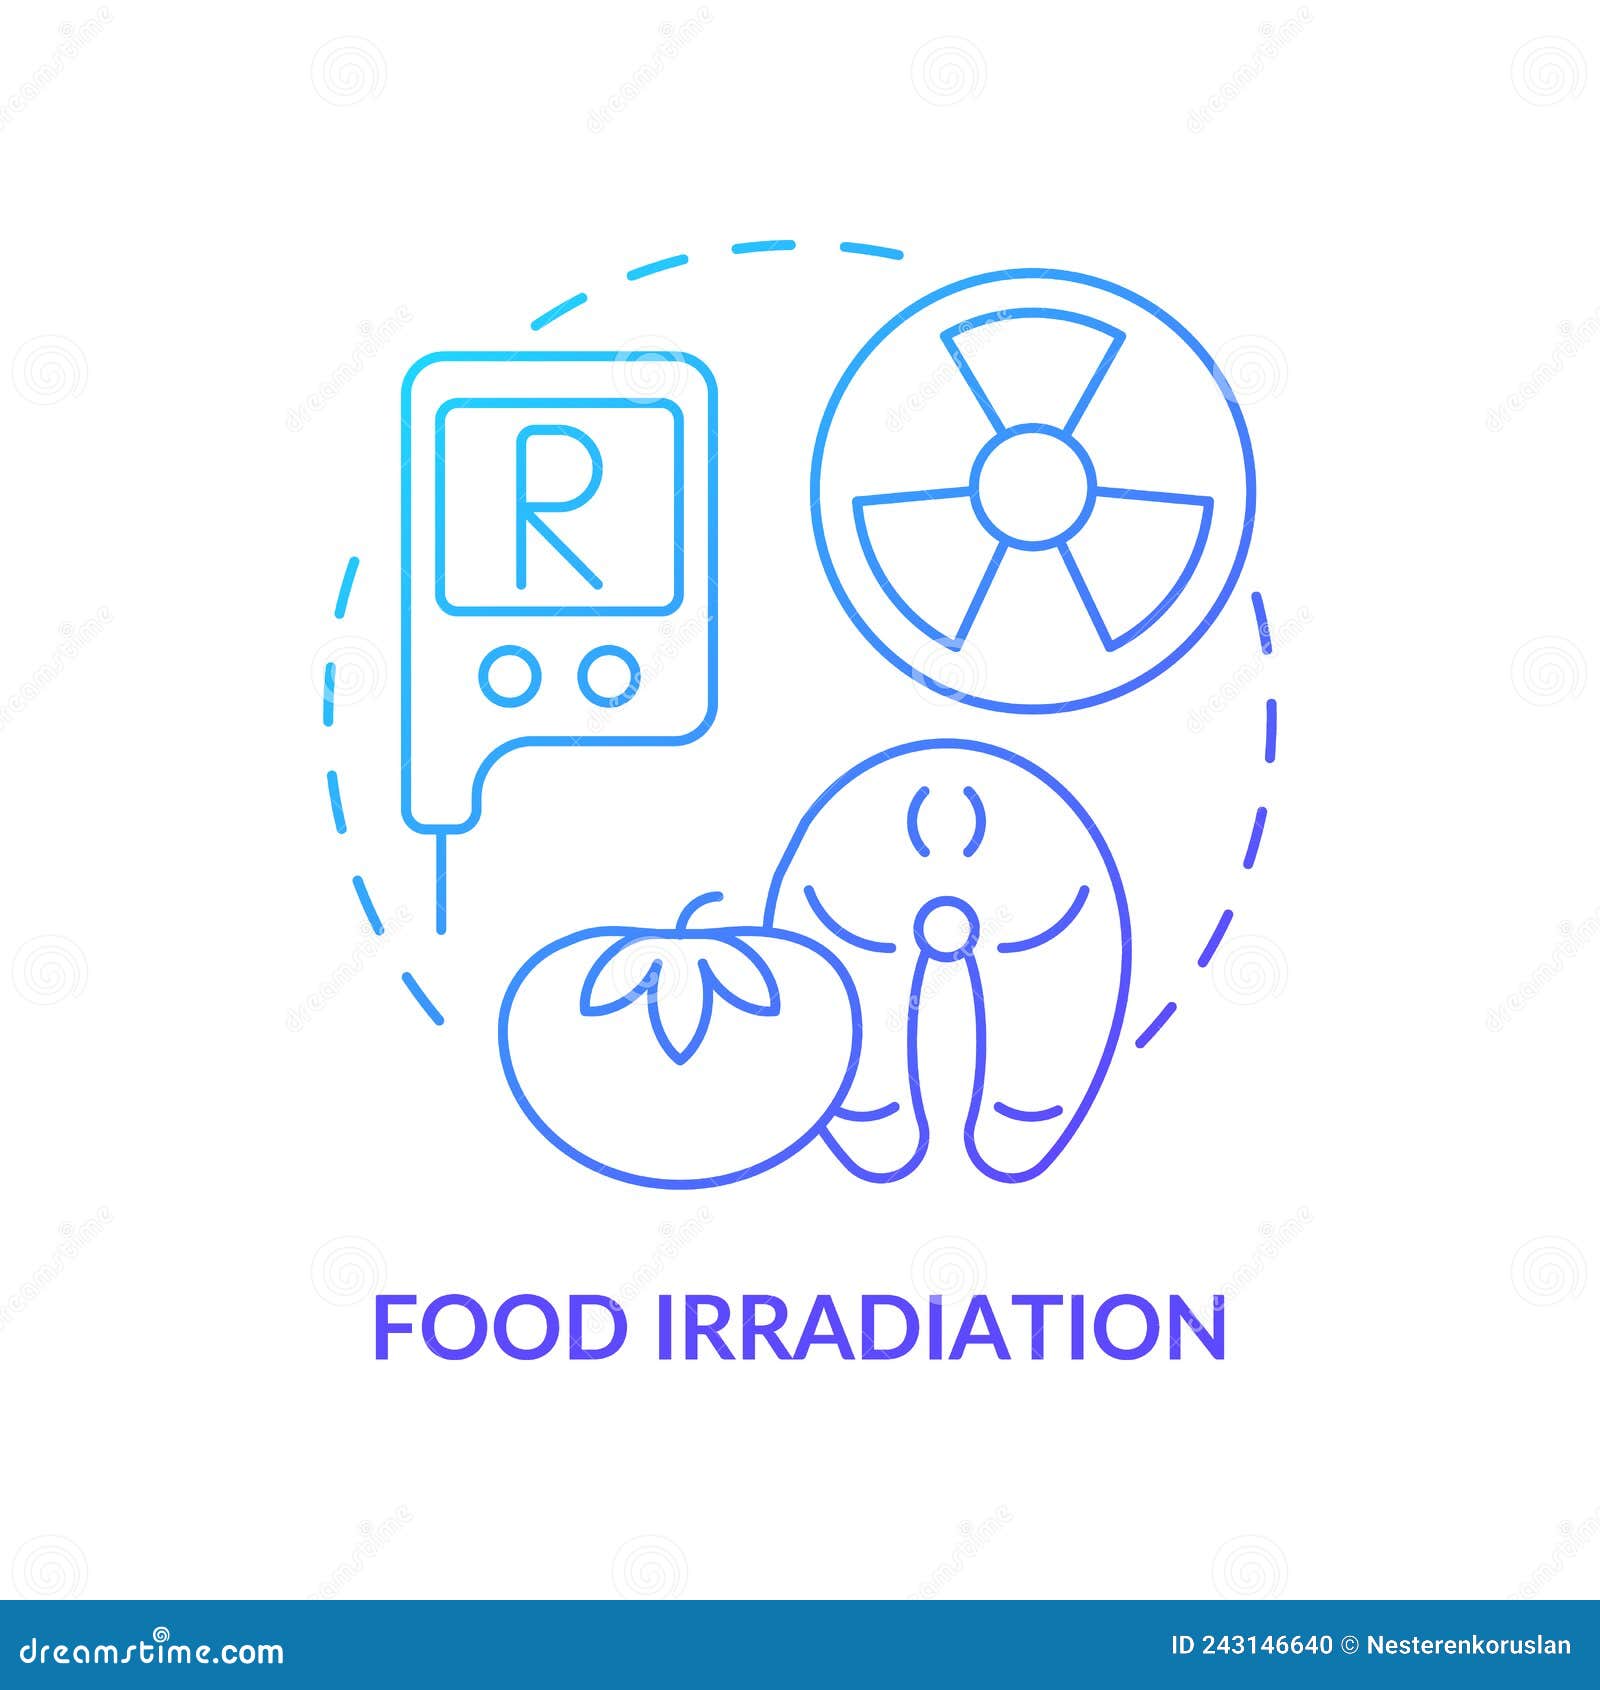 food irradiation blue gradient concept icon